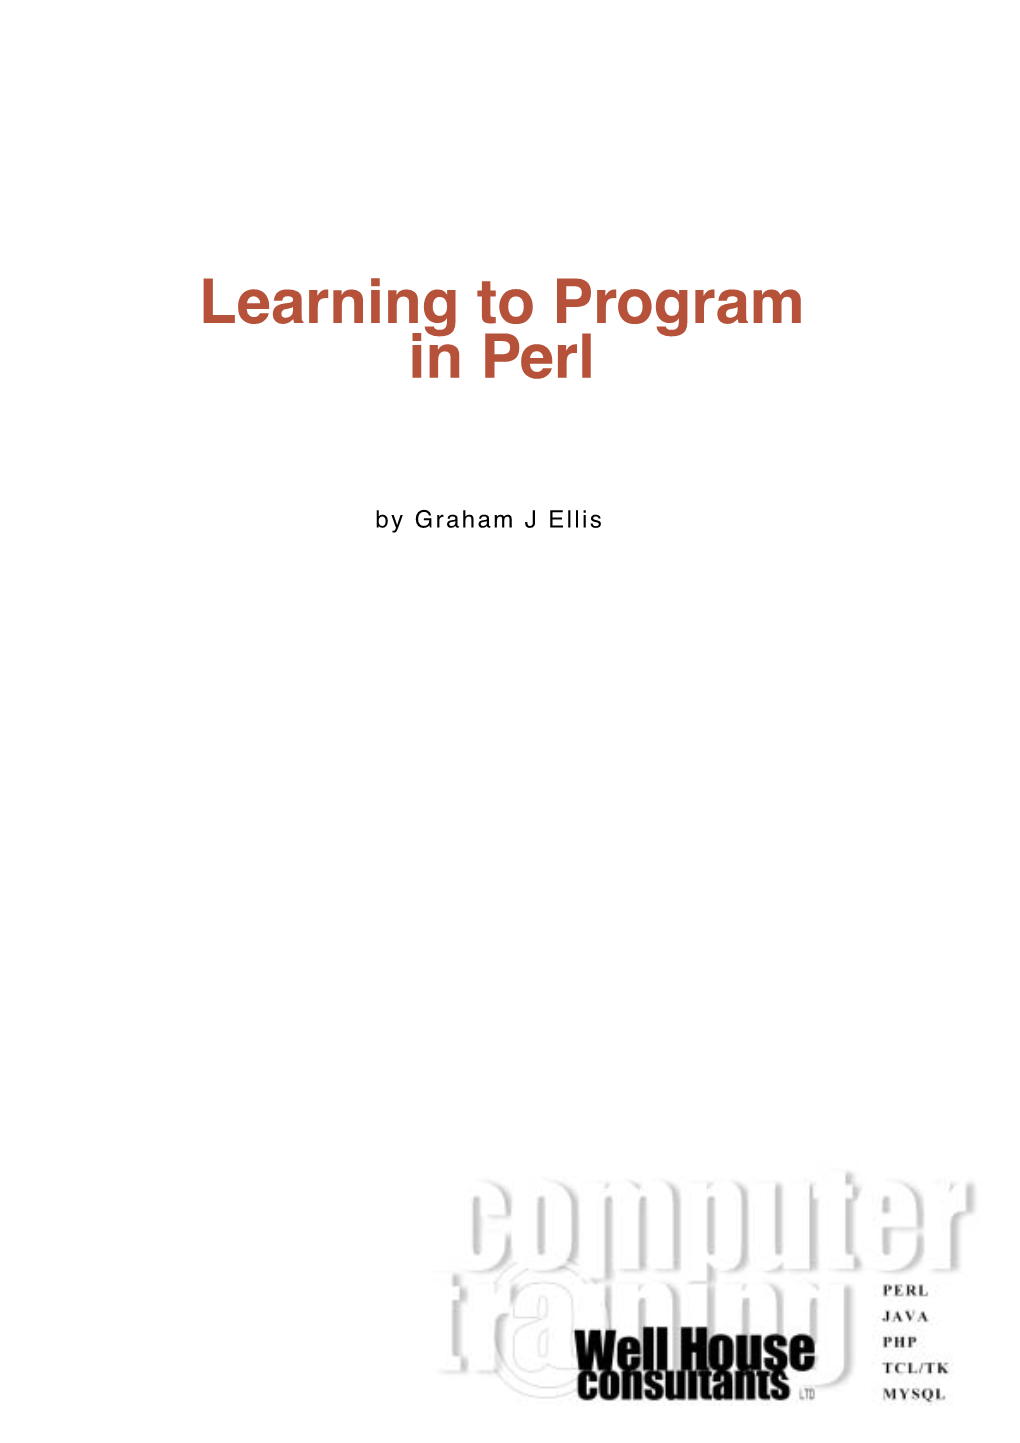 Learning to Program in Perl